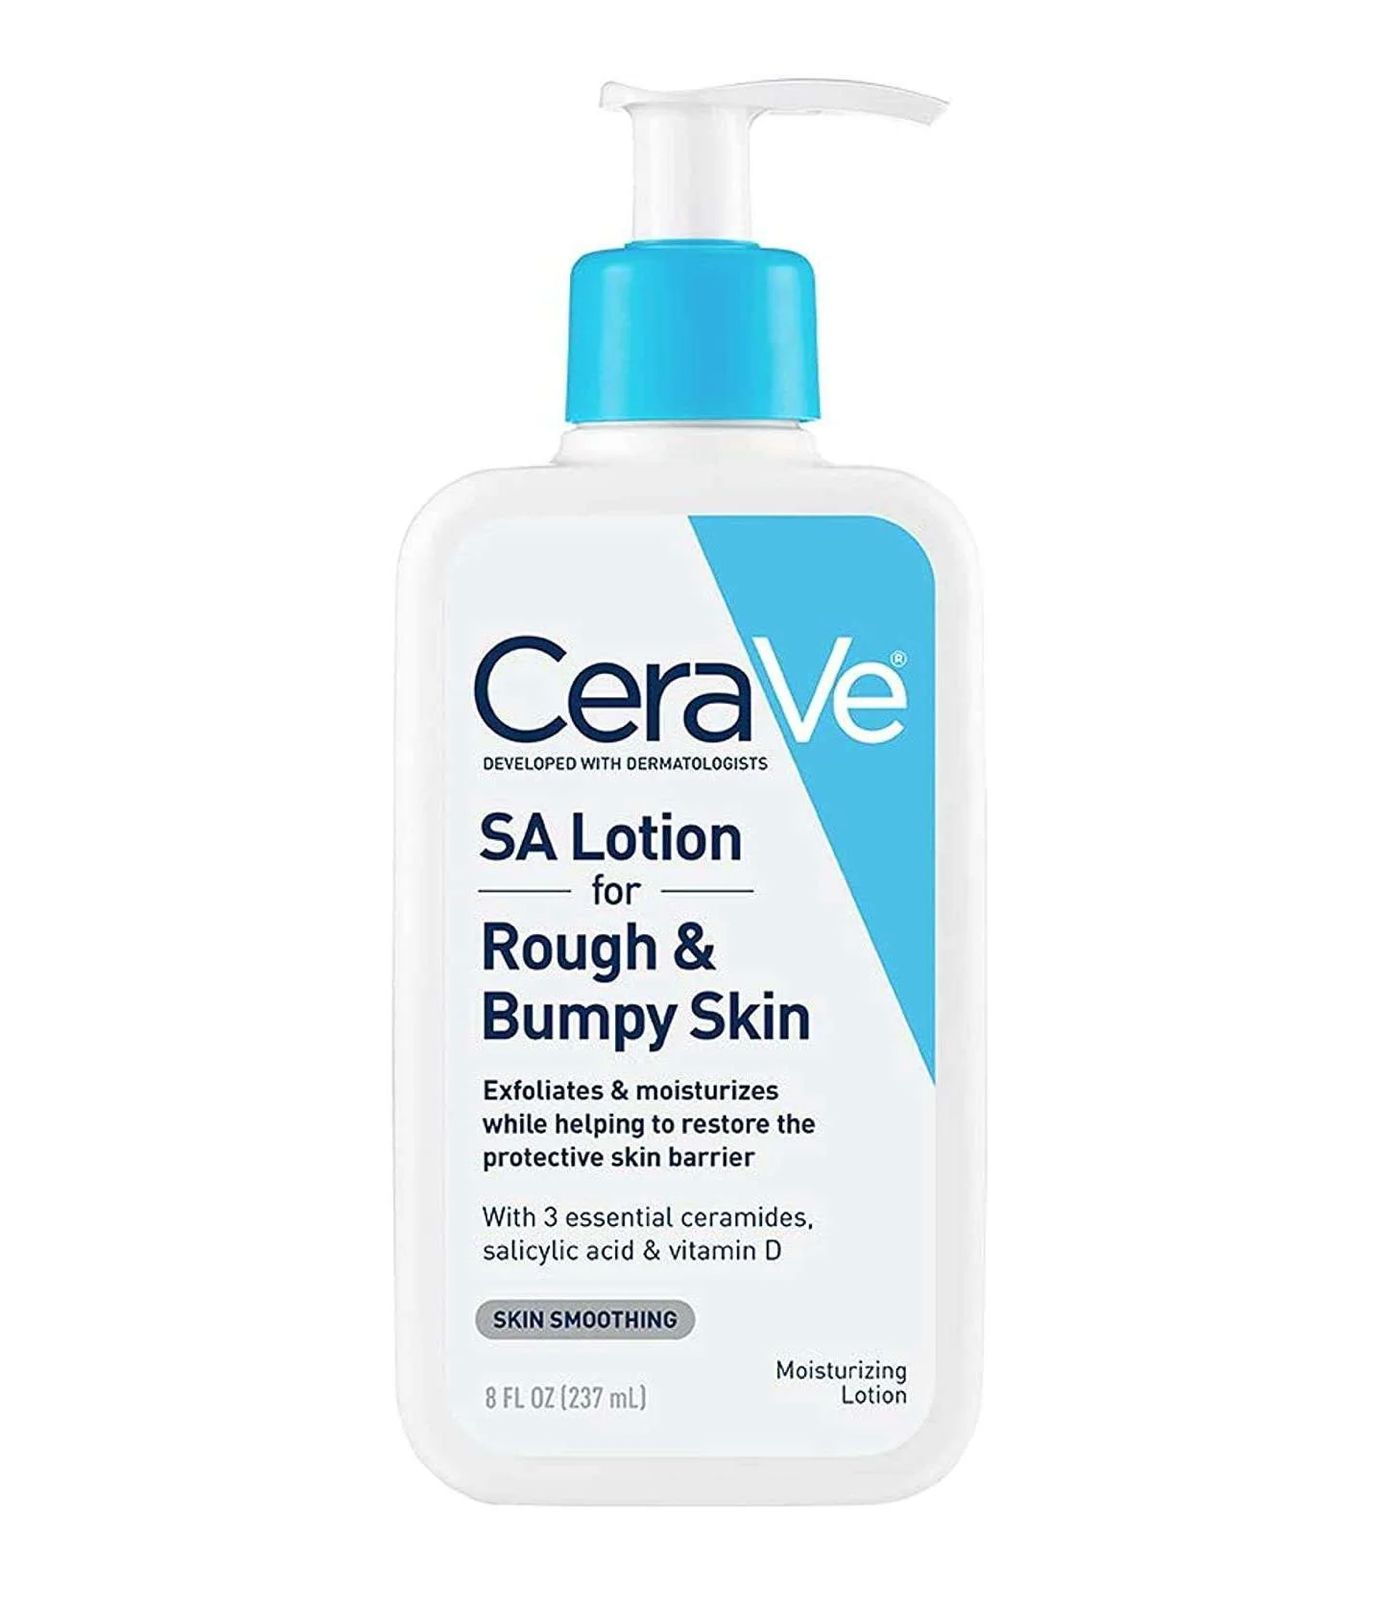 Лосьон CeraVe SA Lotion for Rough & Bumpy Skin для грубой и ухабистокой кожи 237мл hand and foot anti dry cracking and peeling repair cream foot root cracking oil dead skin removal rough frostbite cracking cream